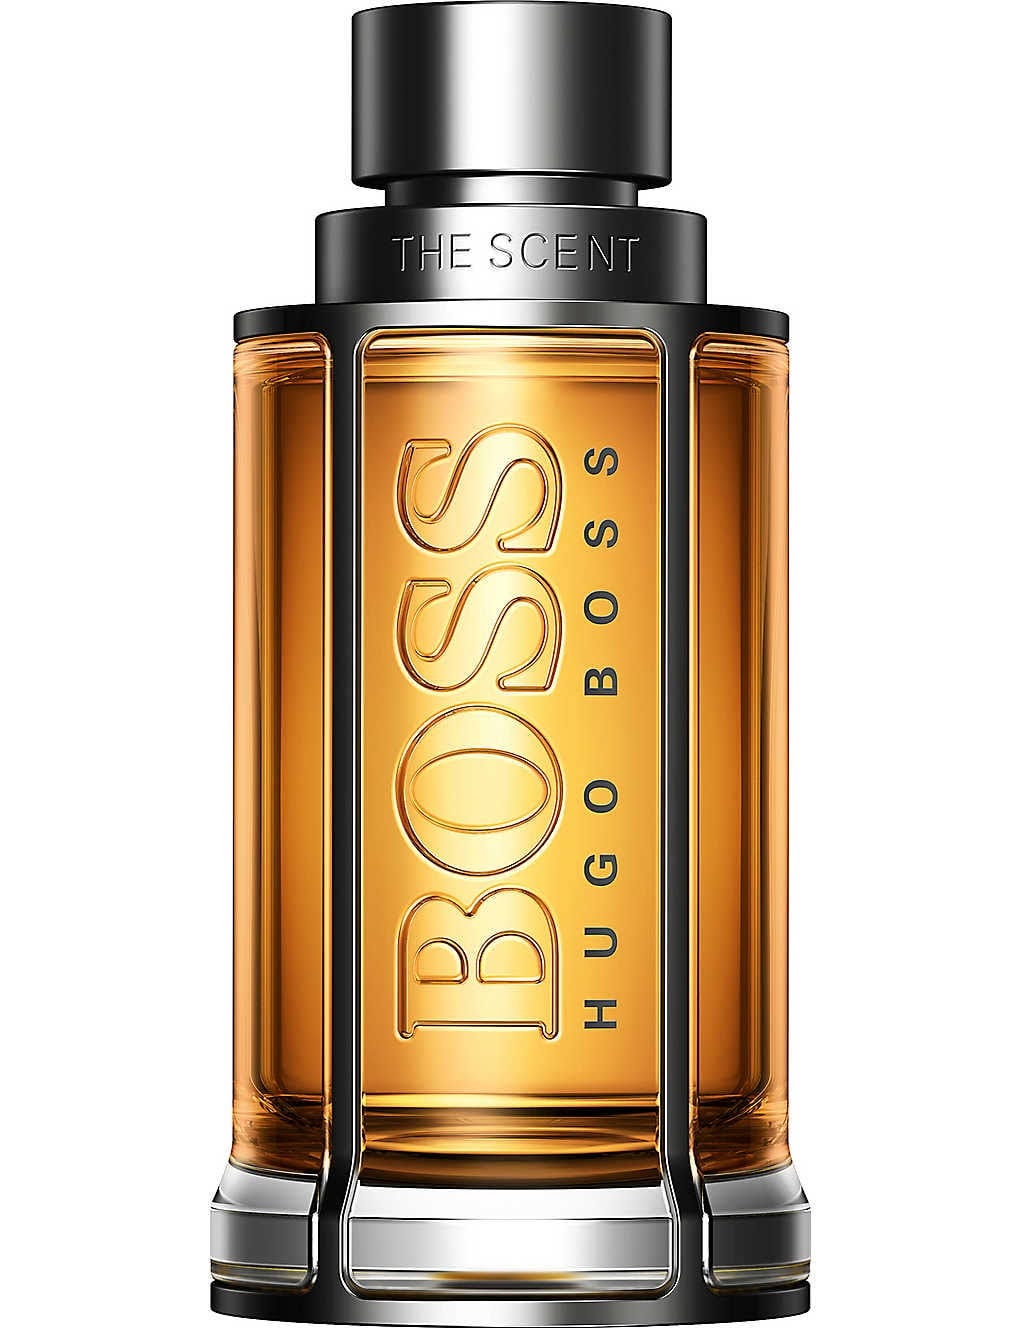 Hugo Boss The Scent: Irresistible Warm & Spicy Men's Fragrance | Image